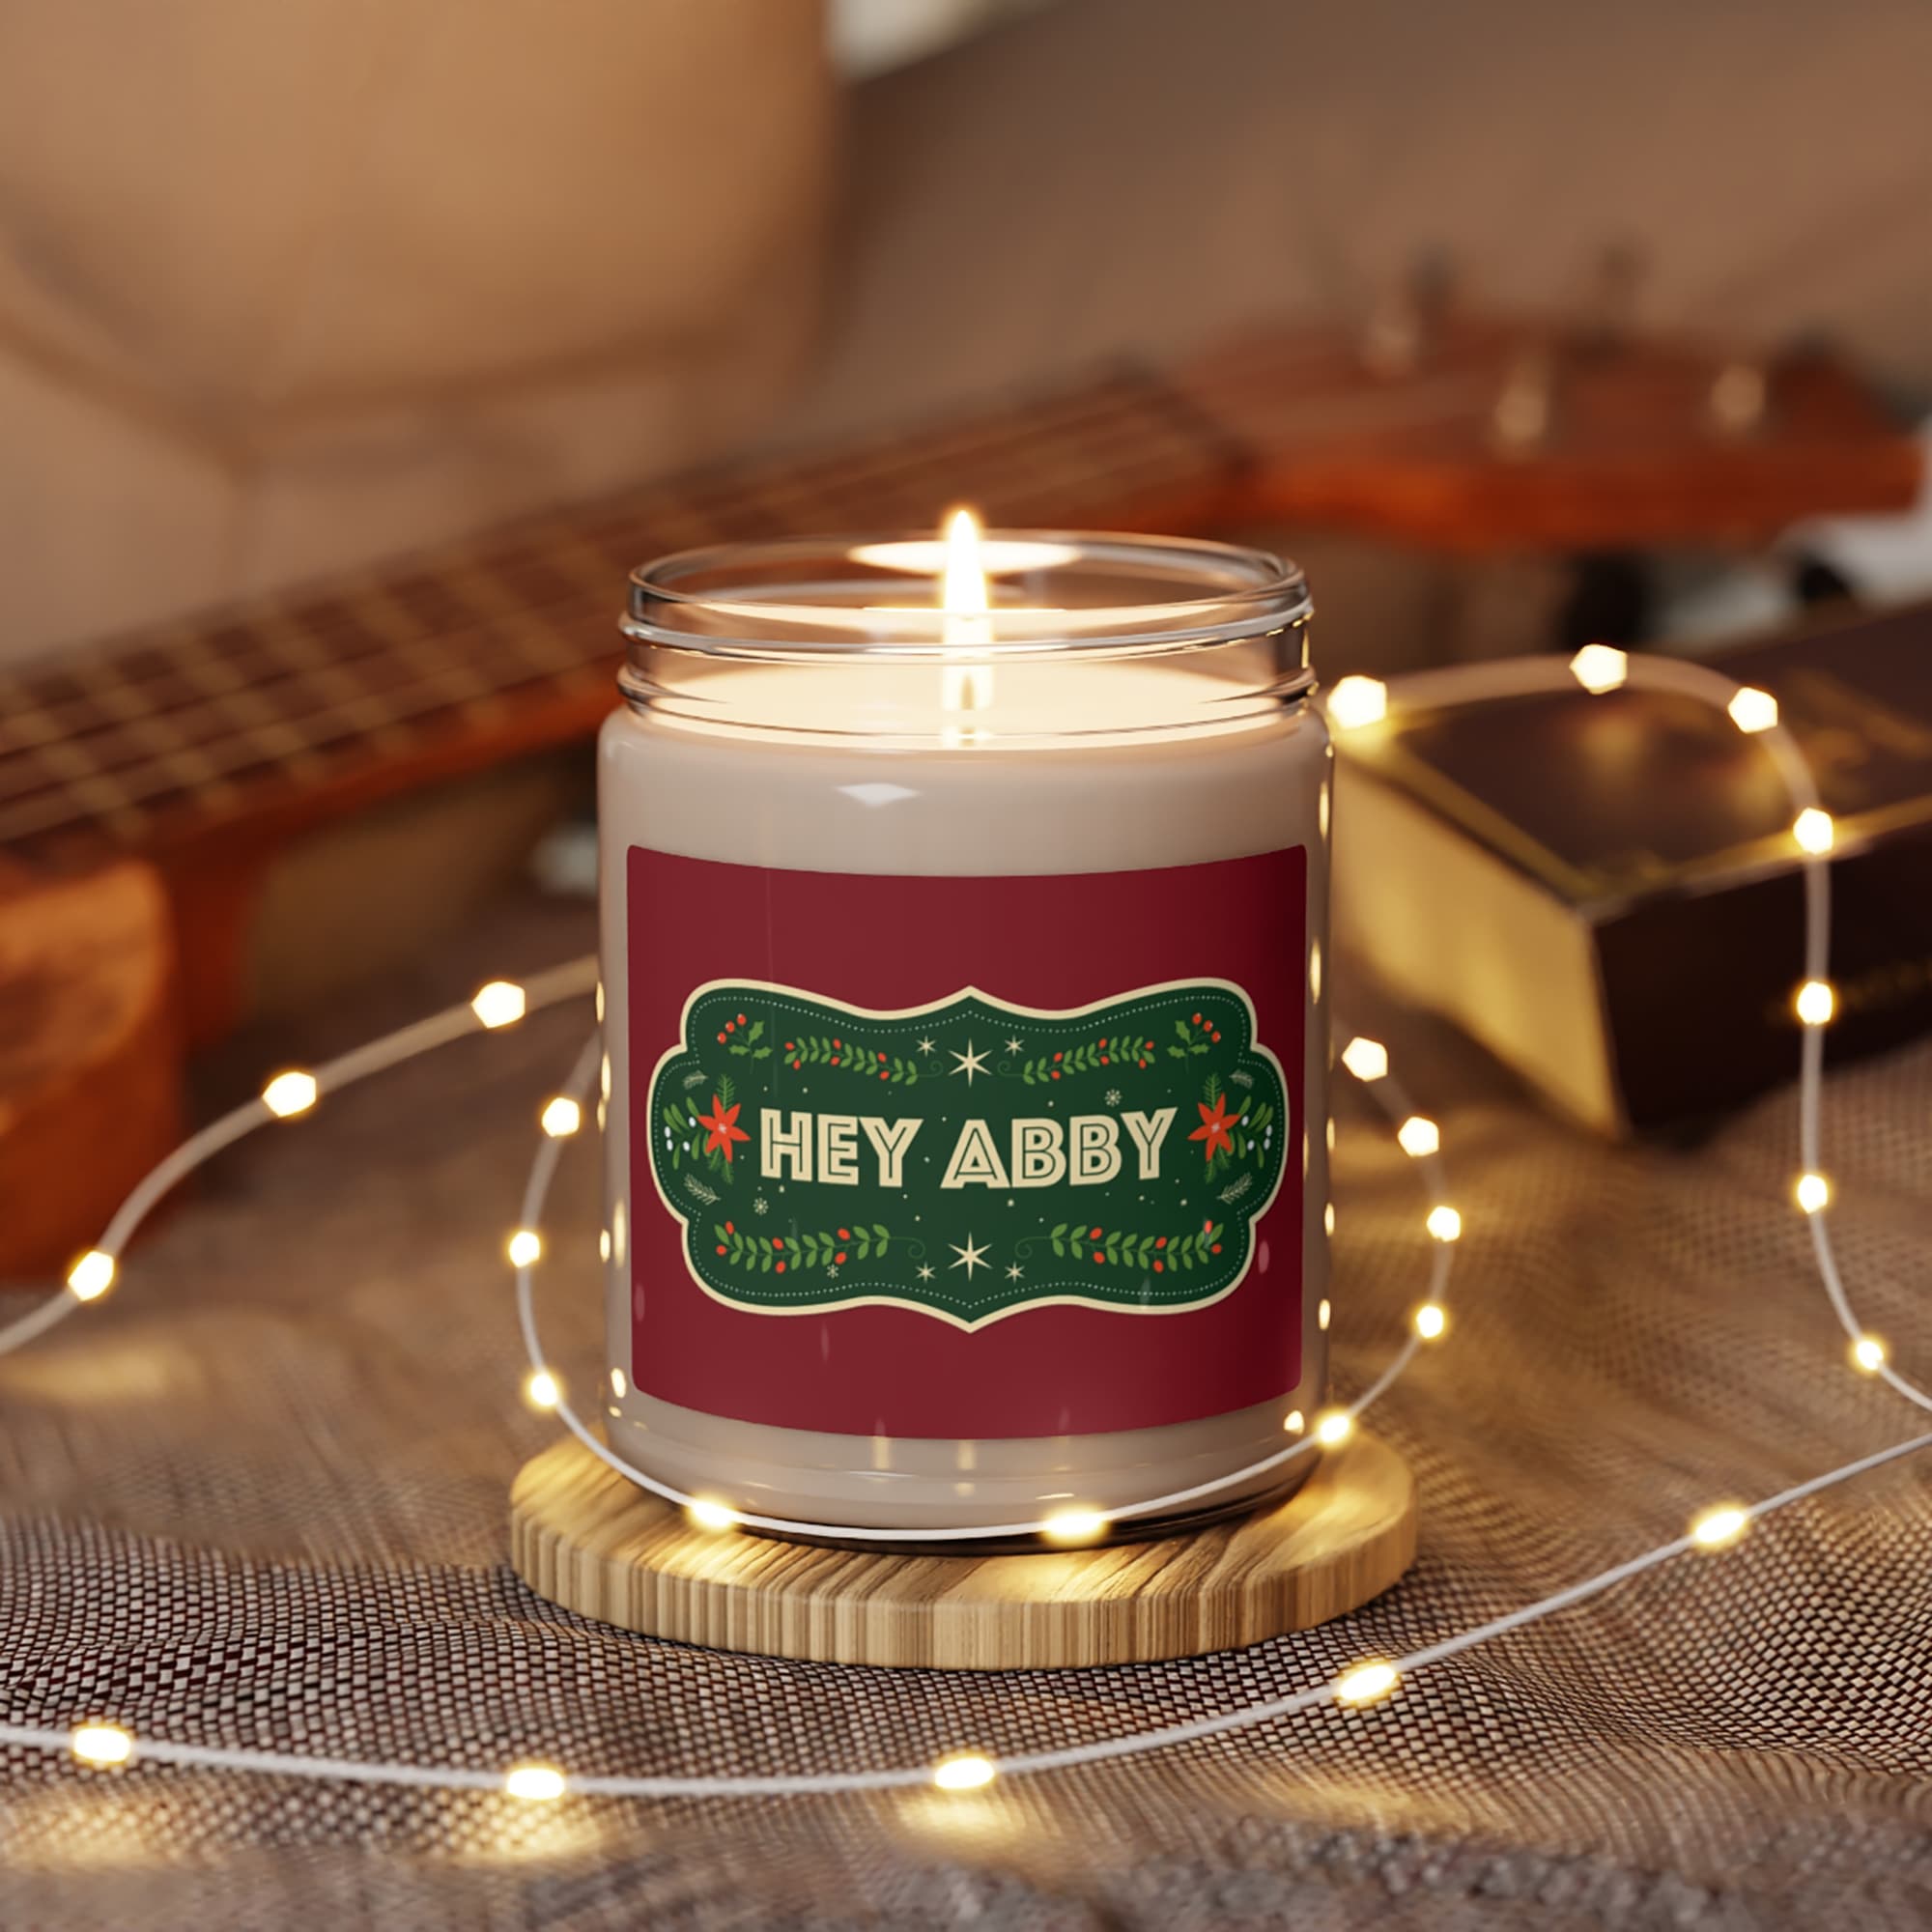 Hey abby scented candles